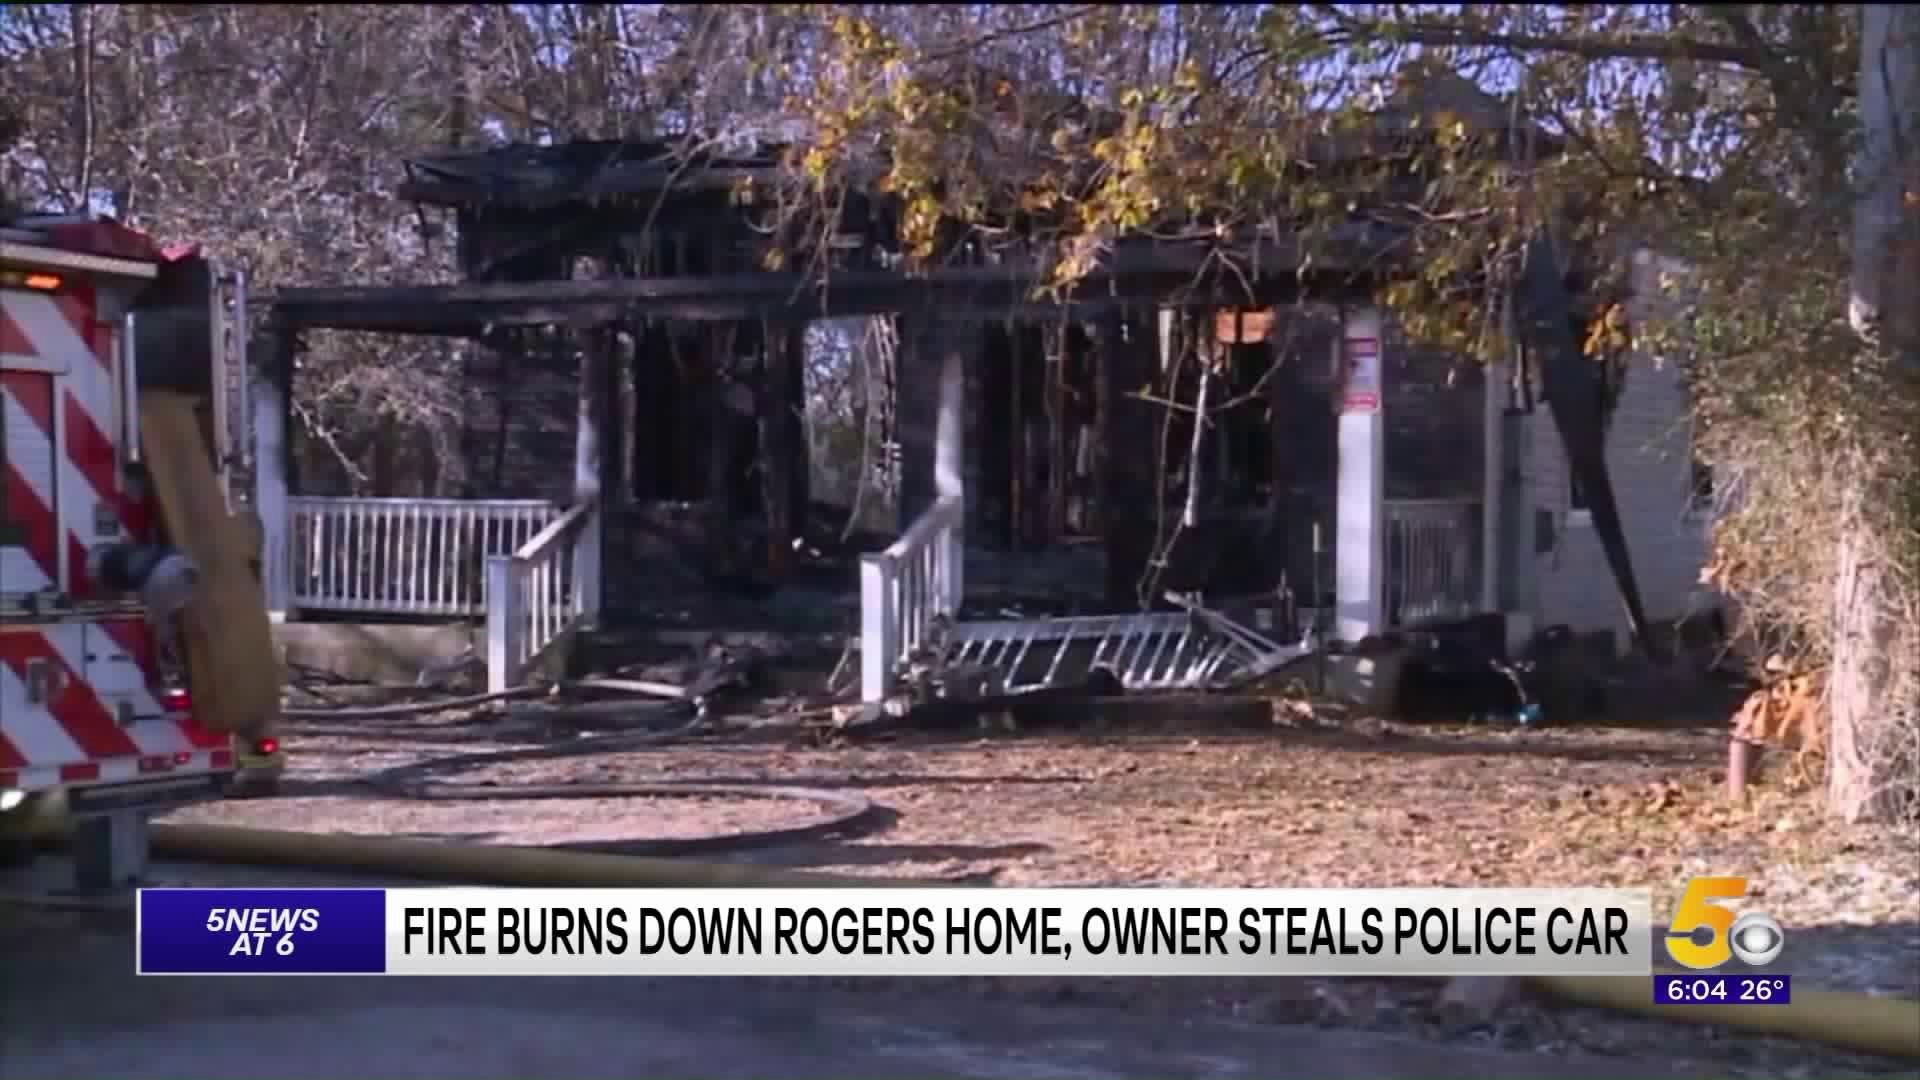 Morning Fire Burns Down Home In Rogers, Owner Steals Police Car